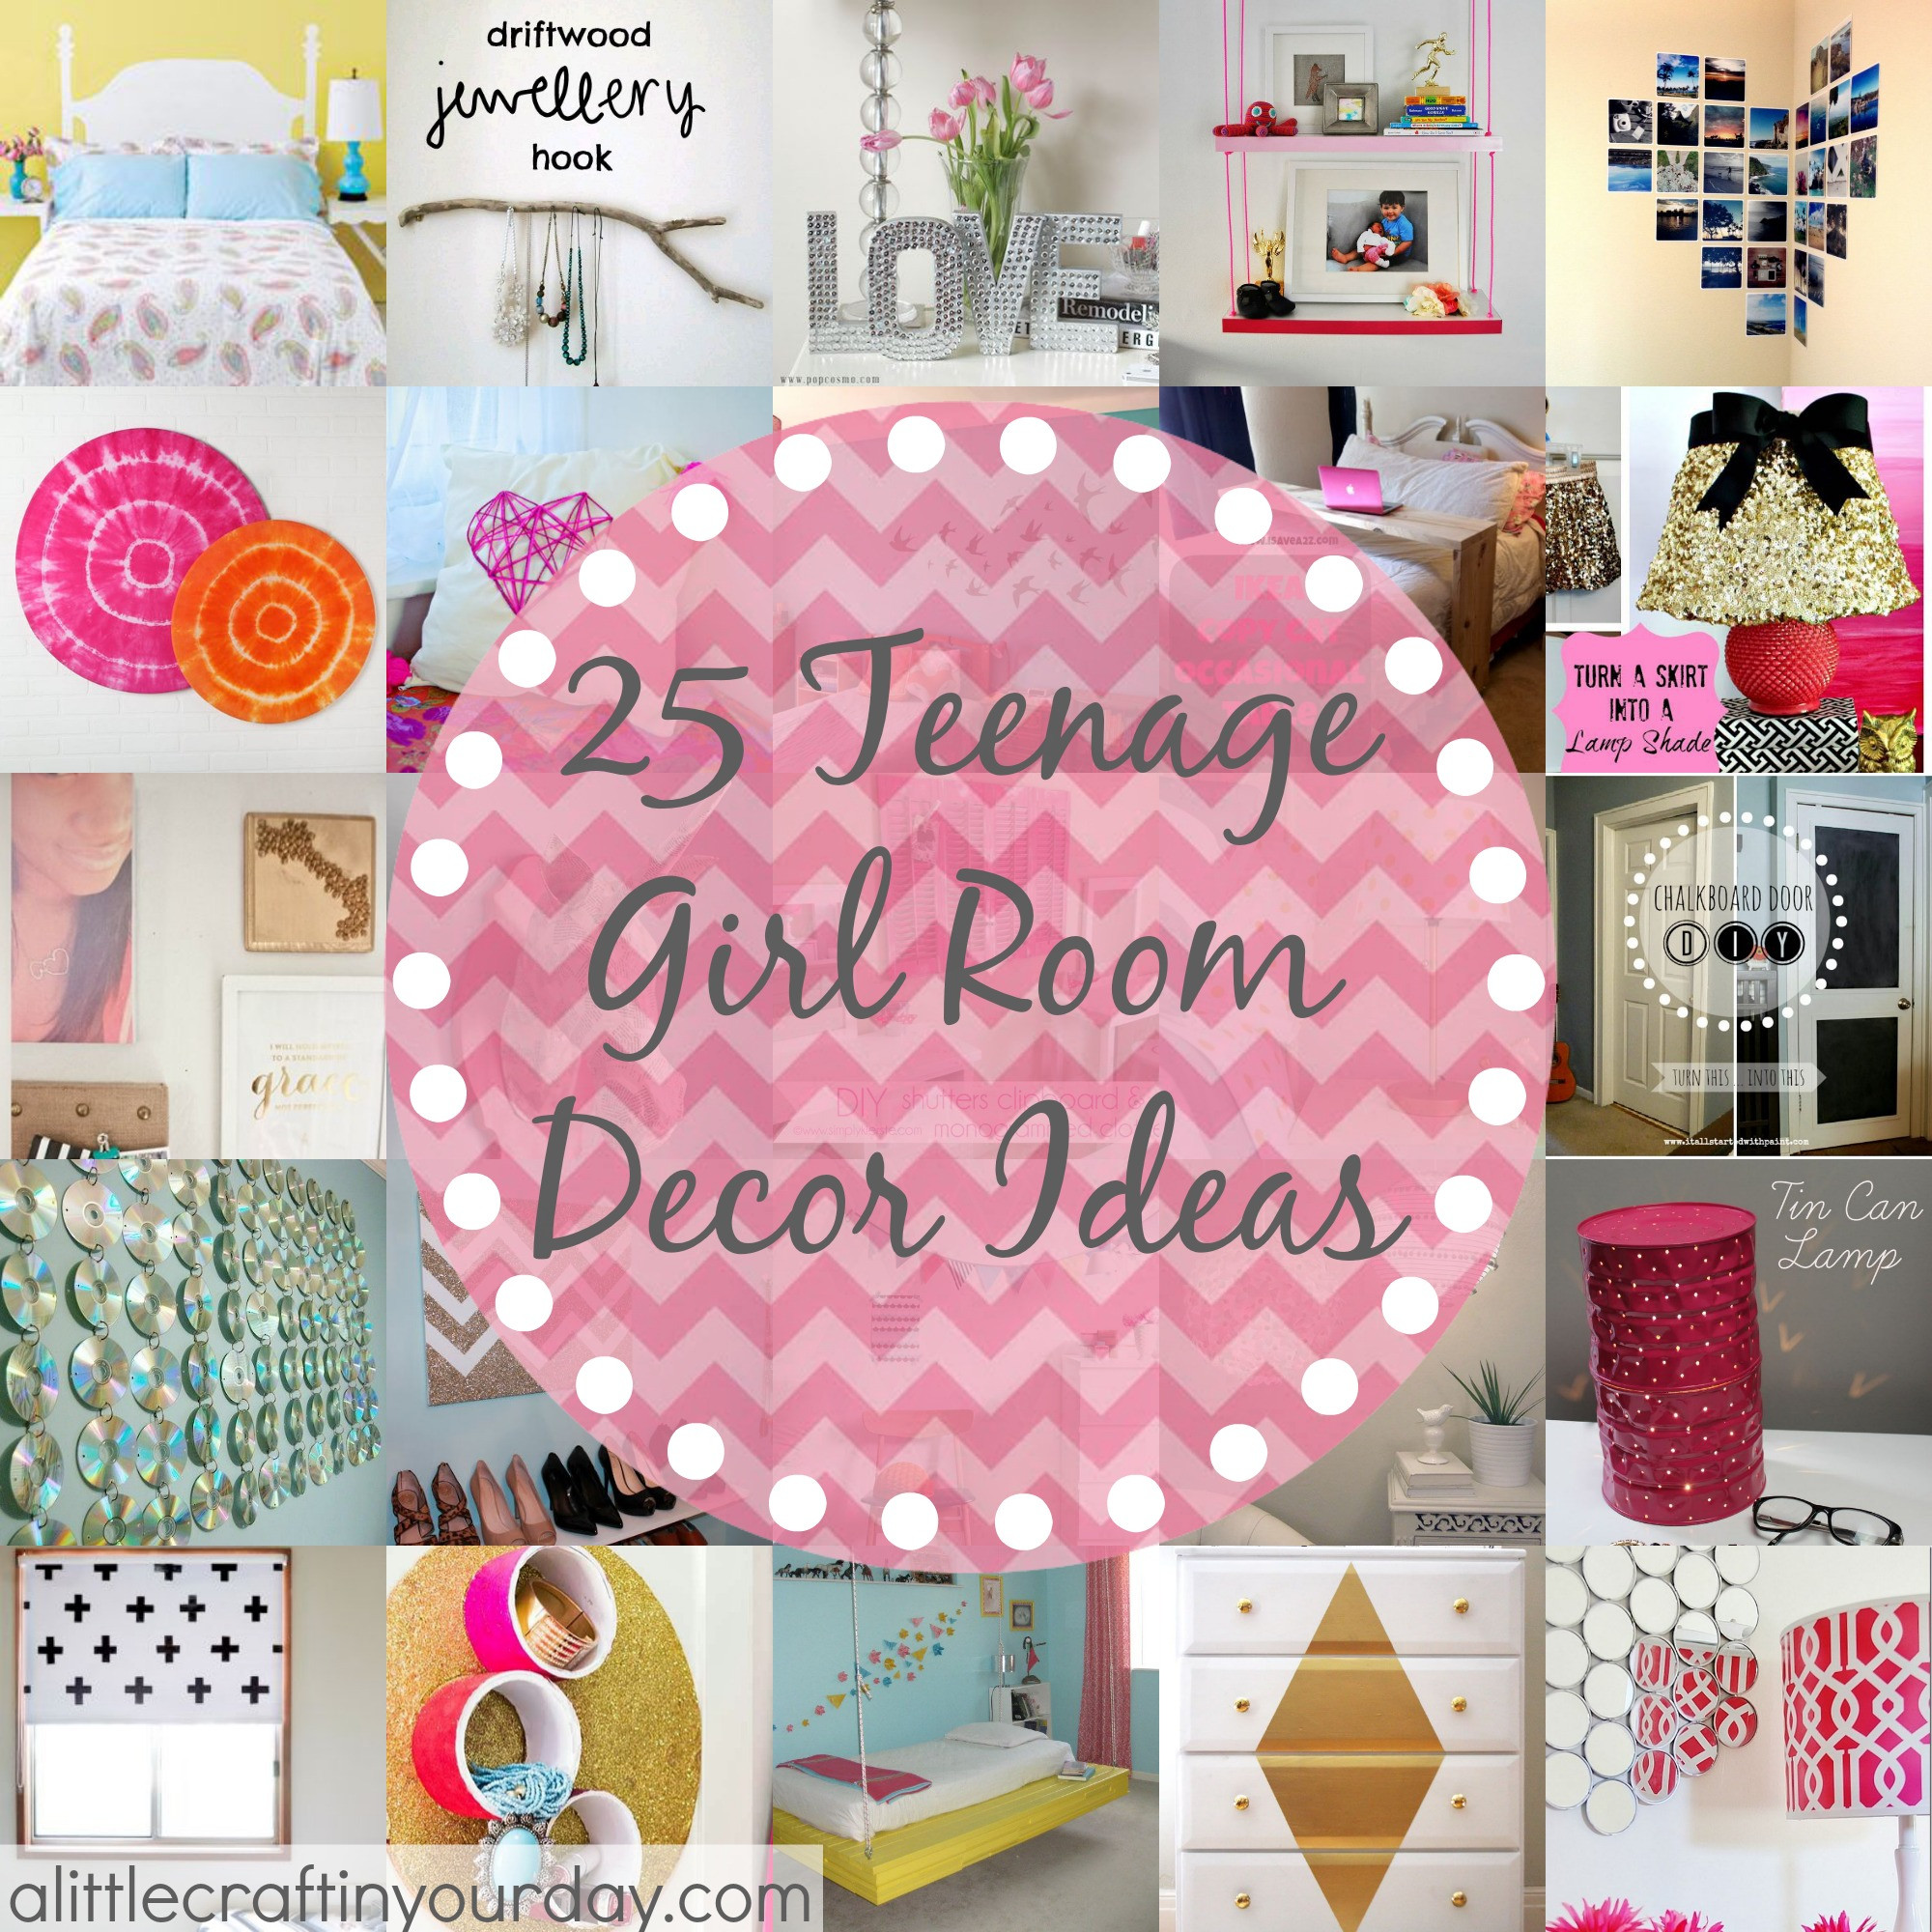 DIY Bedroom Decorations For Teens
 25 More Teenage Girl Room Decor Ideas A Little Craft In